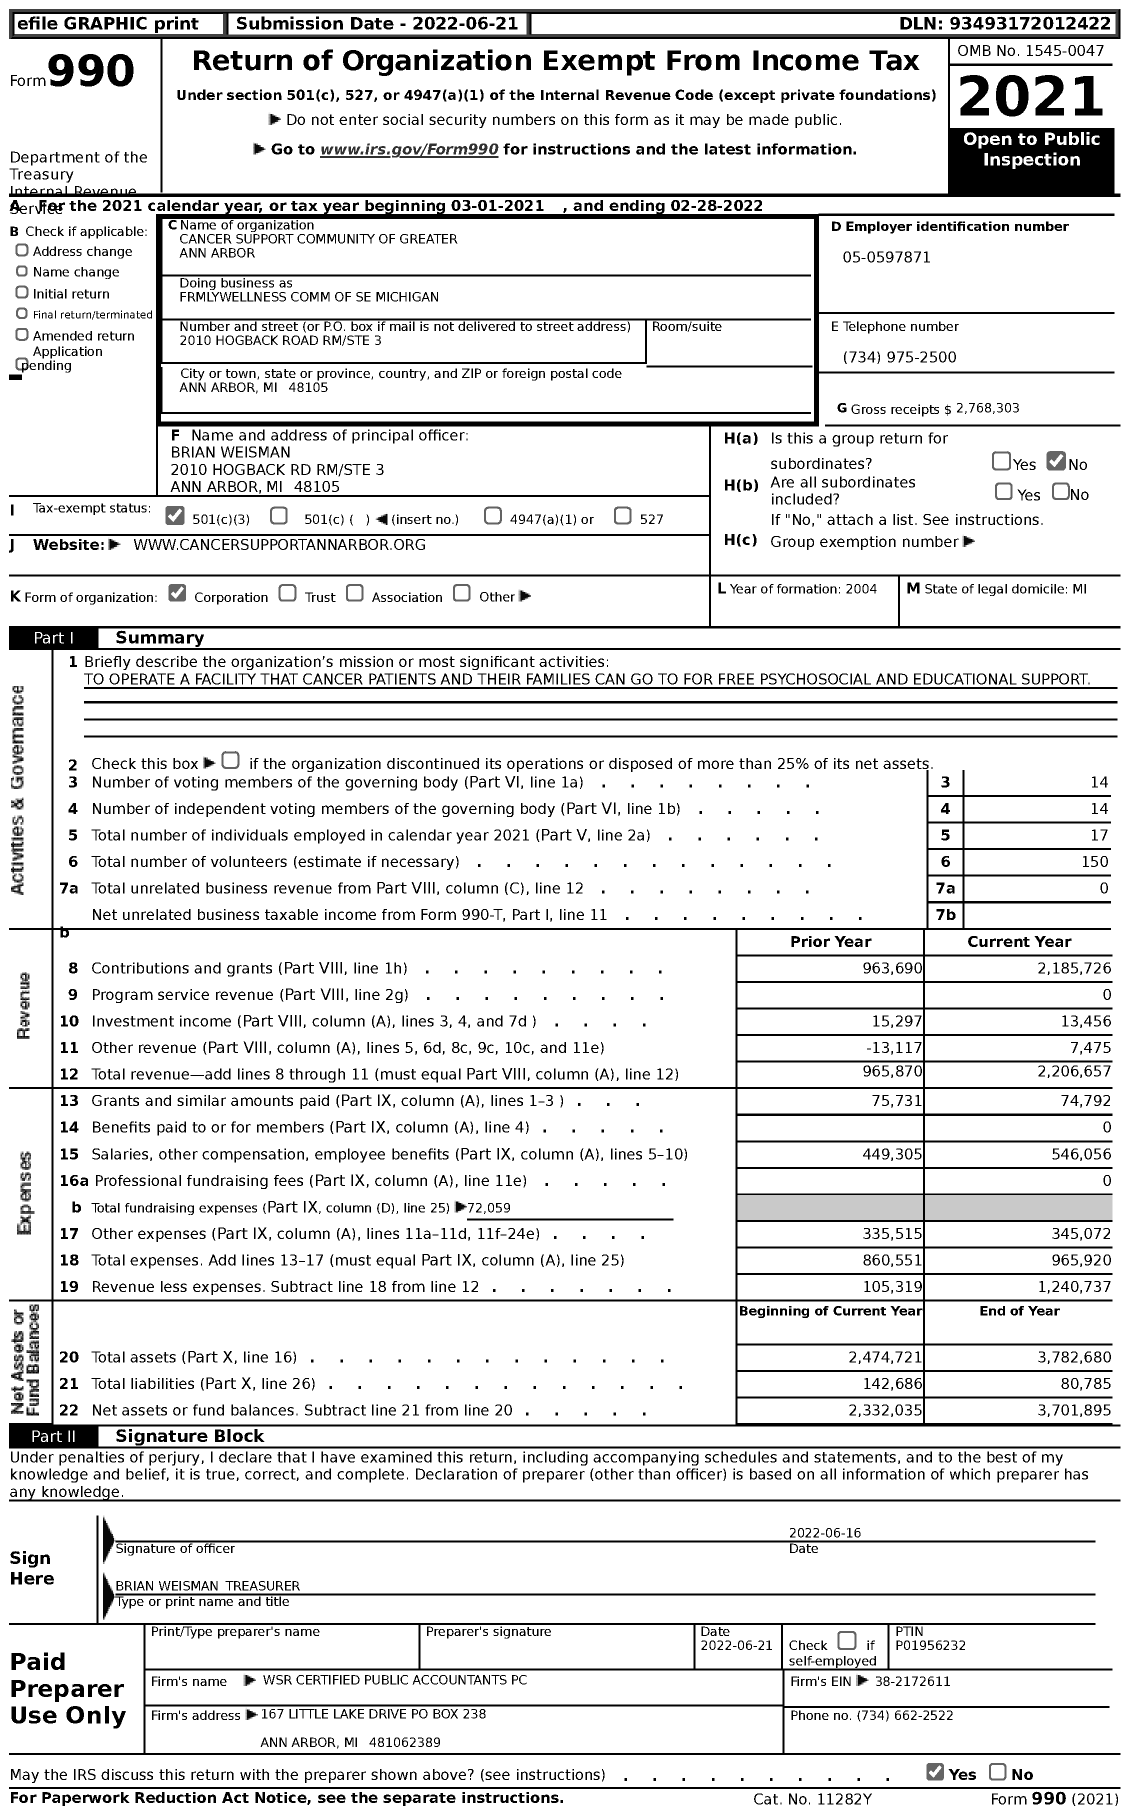 Image of first page of 2021 Form 990 for Frmlywellness Comm of Se Michigan